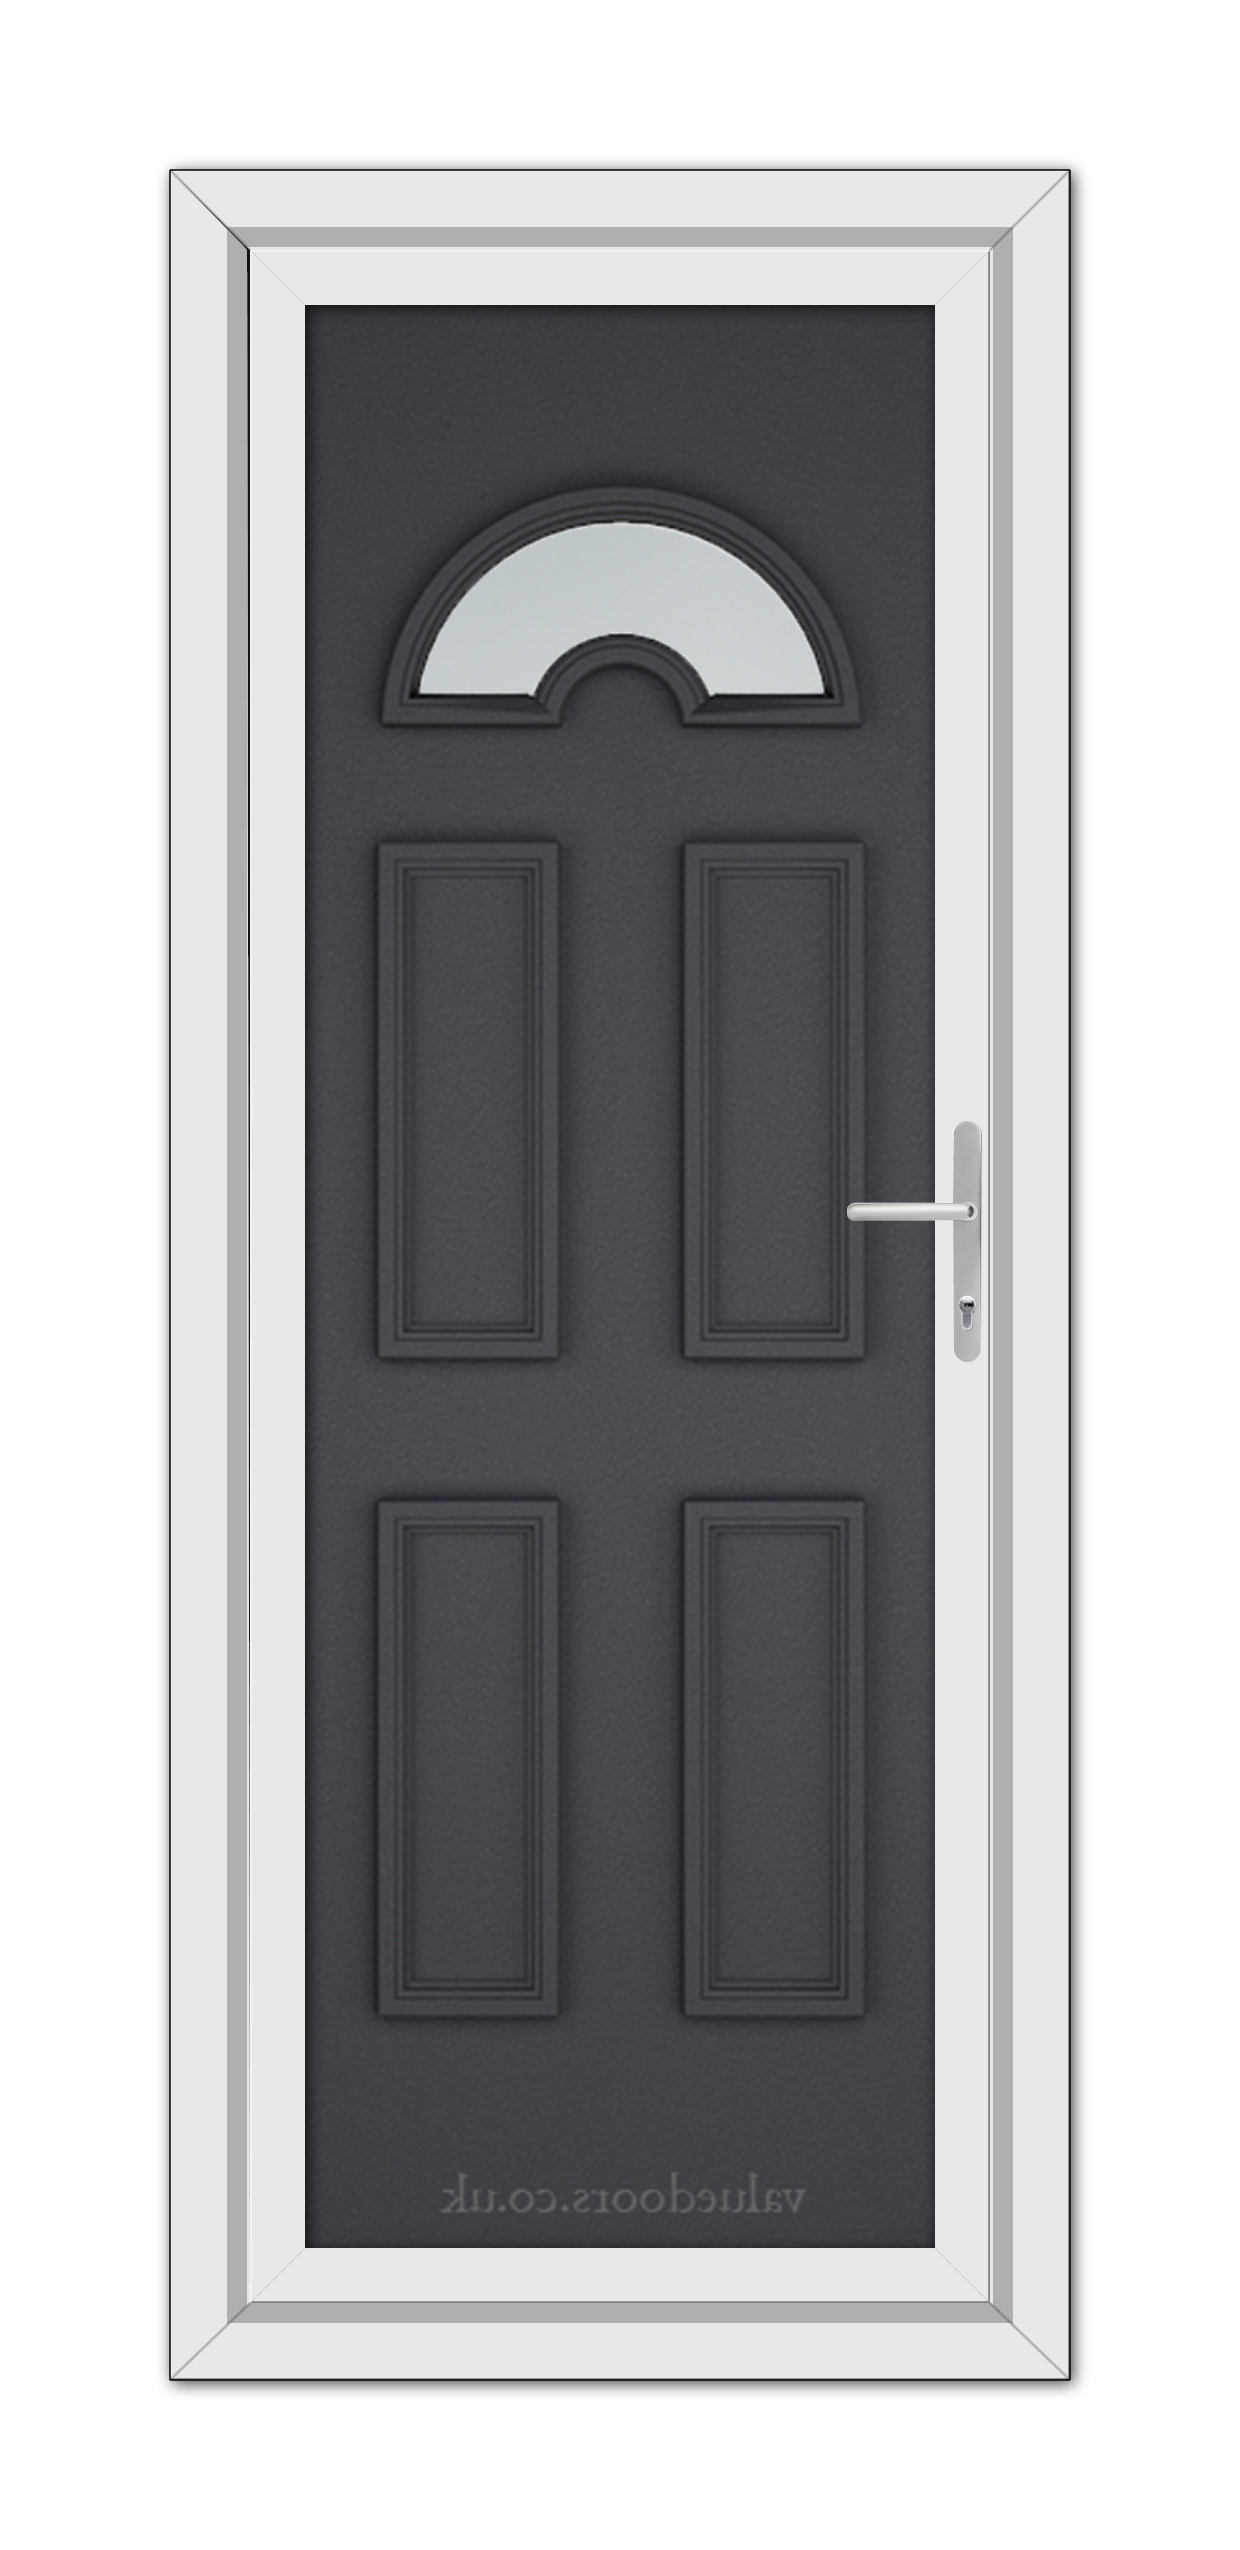 A modern Grey Grained Sandringham uPVC Door with a semicircular window at the top, framed in white with a metallic handle on the right side.